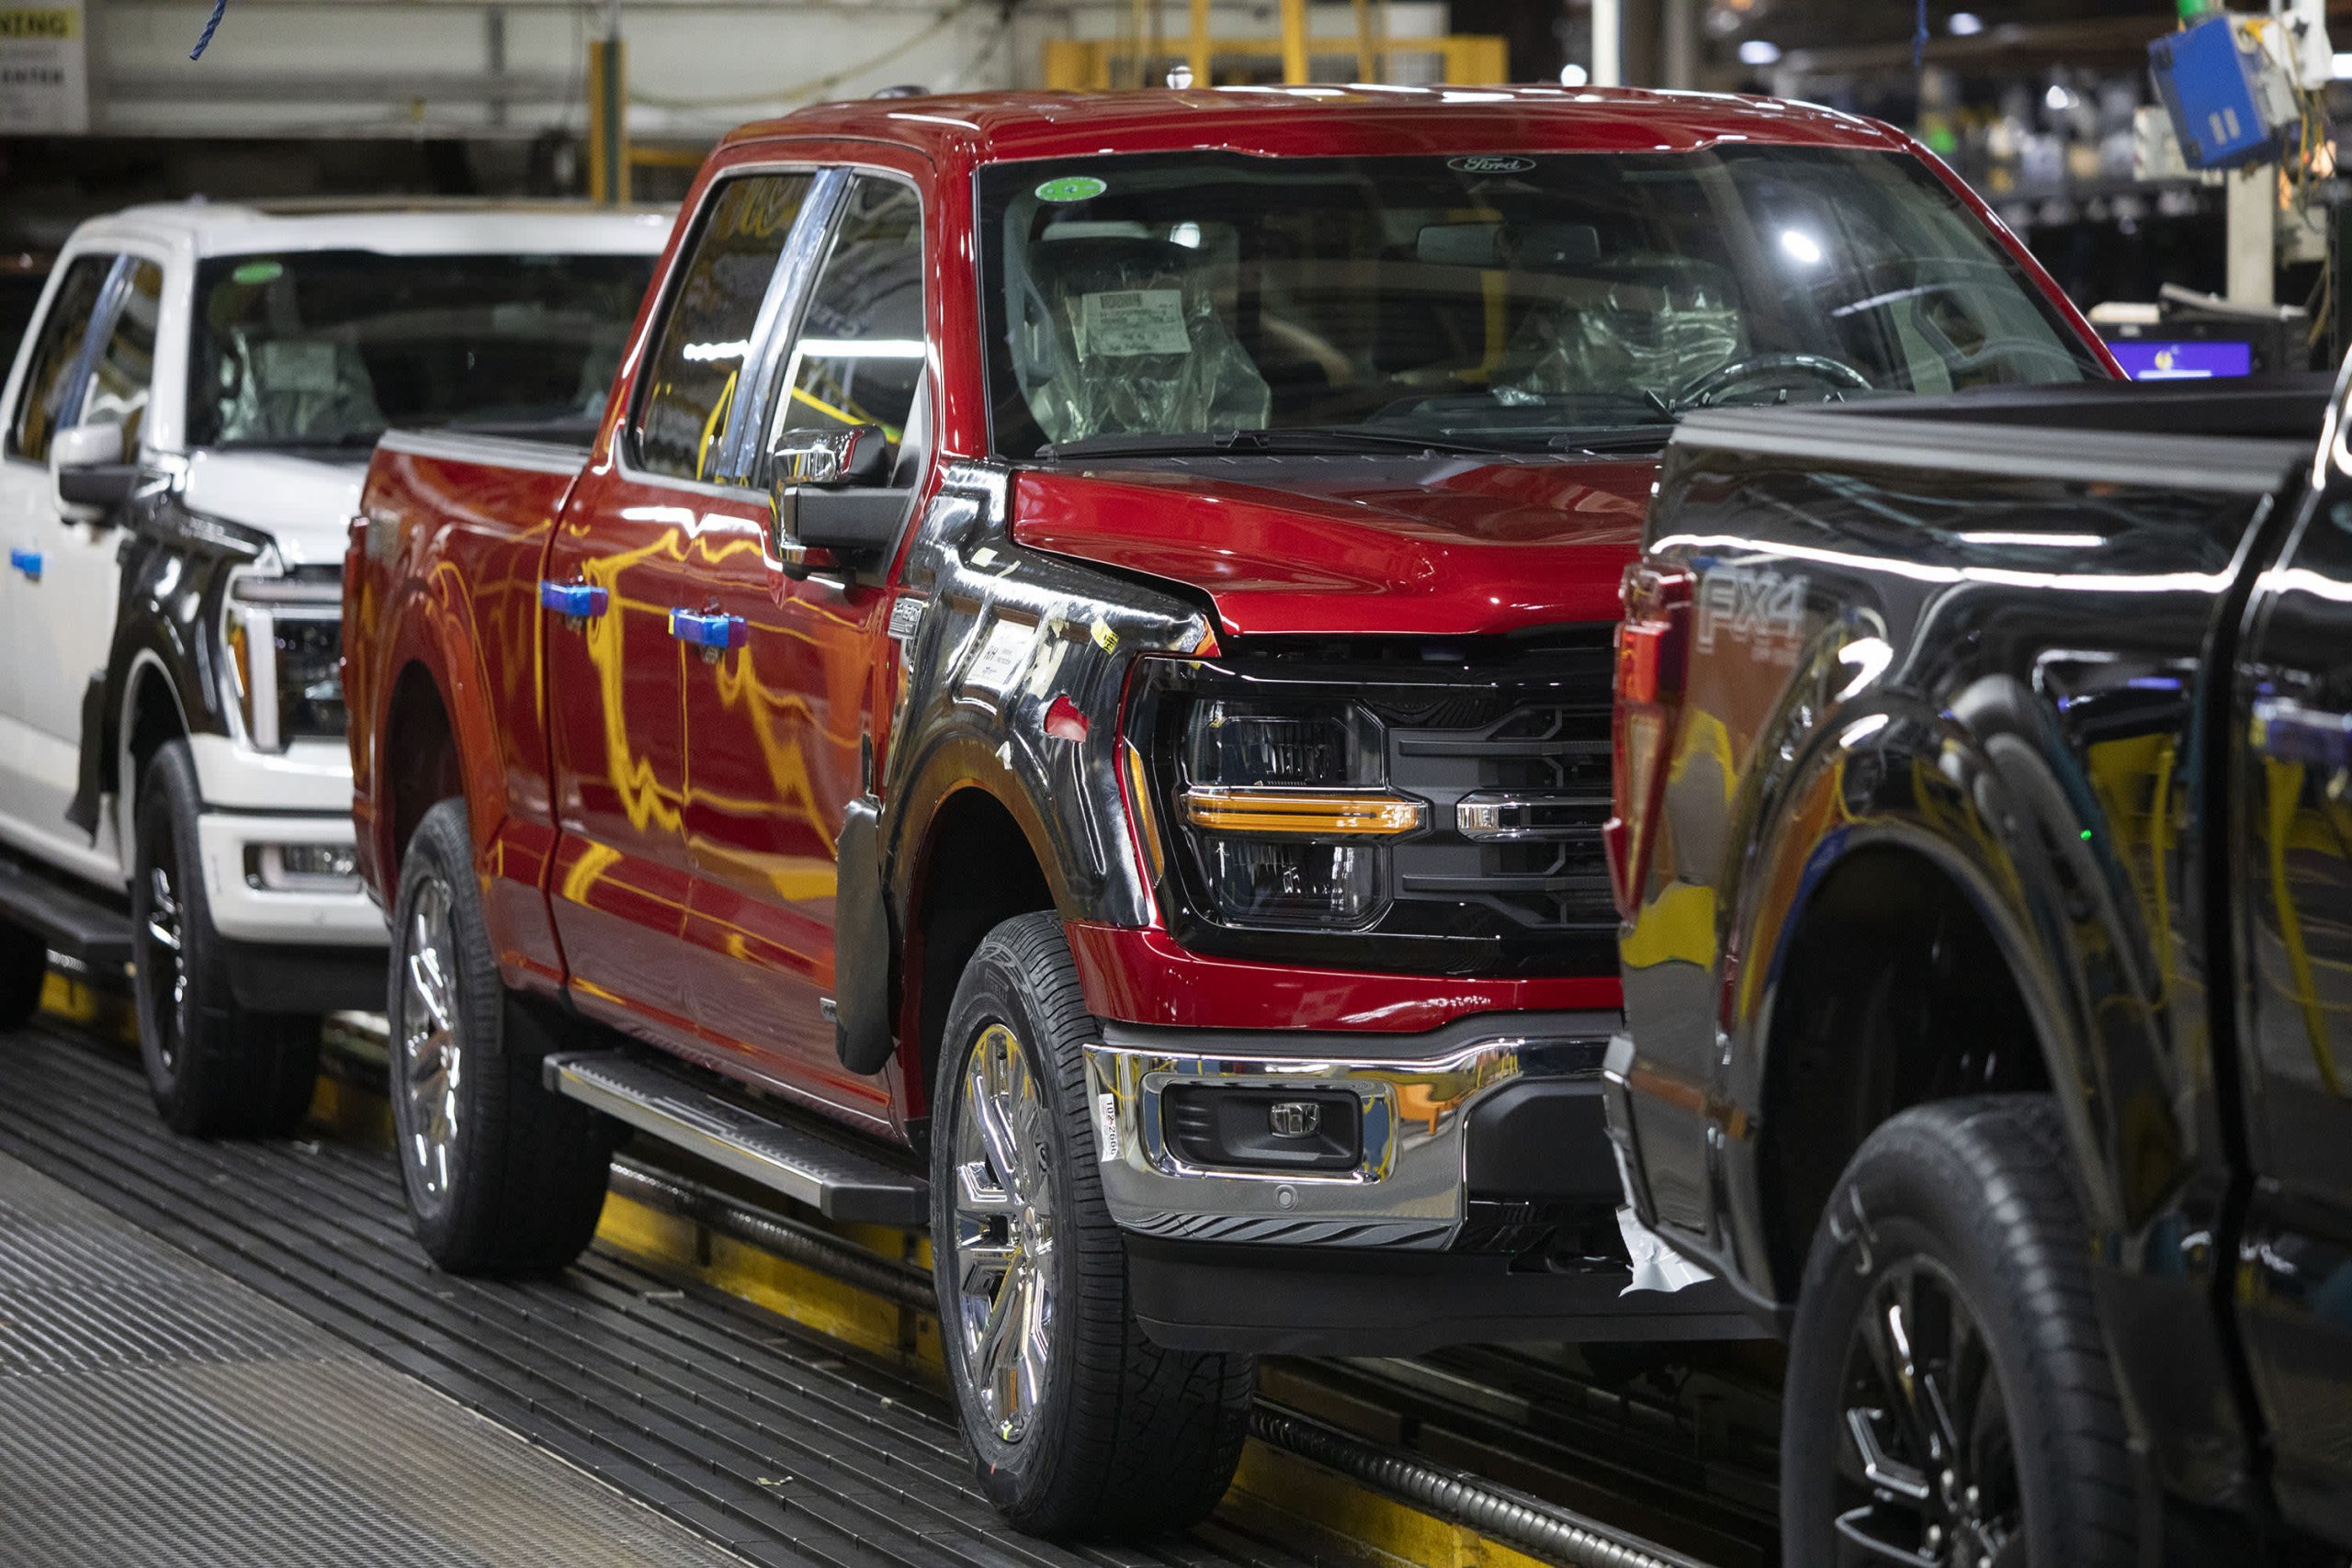 We’re slashing our rating on Ford after the automaker’s old issues come back to haunt it